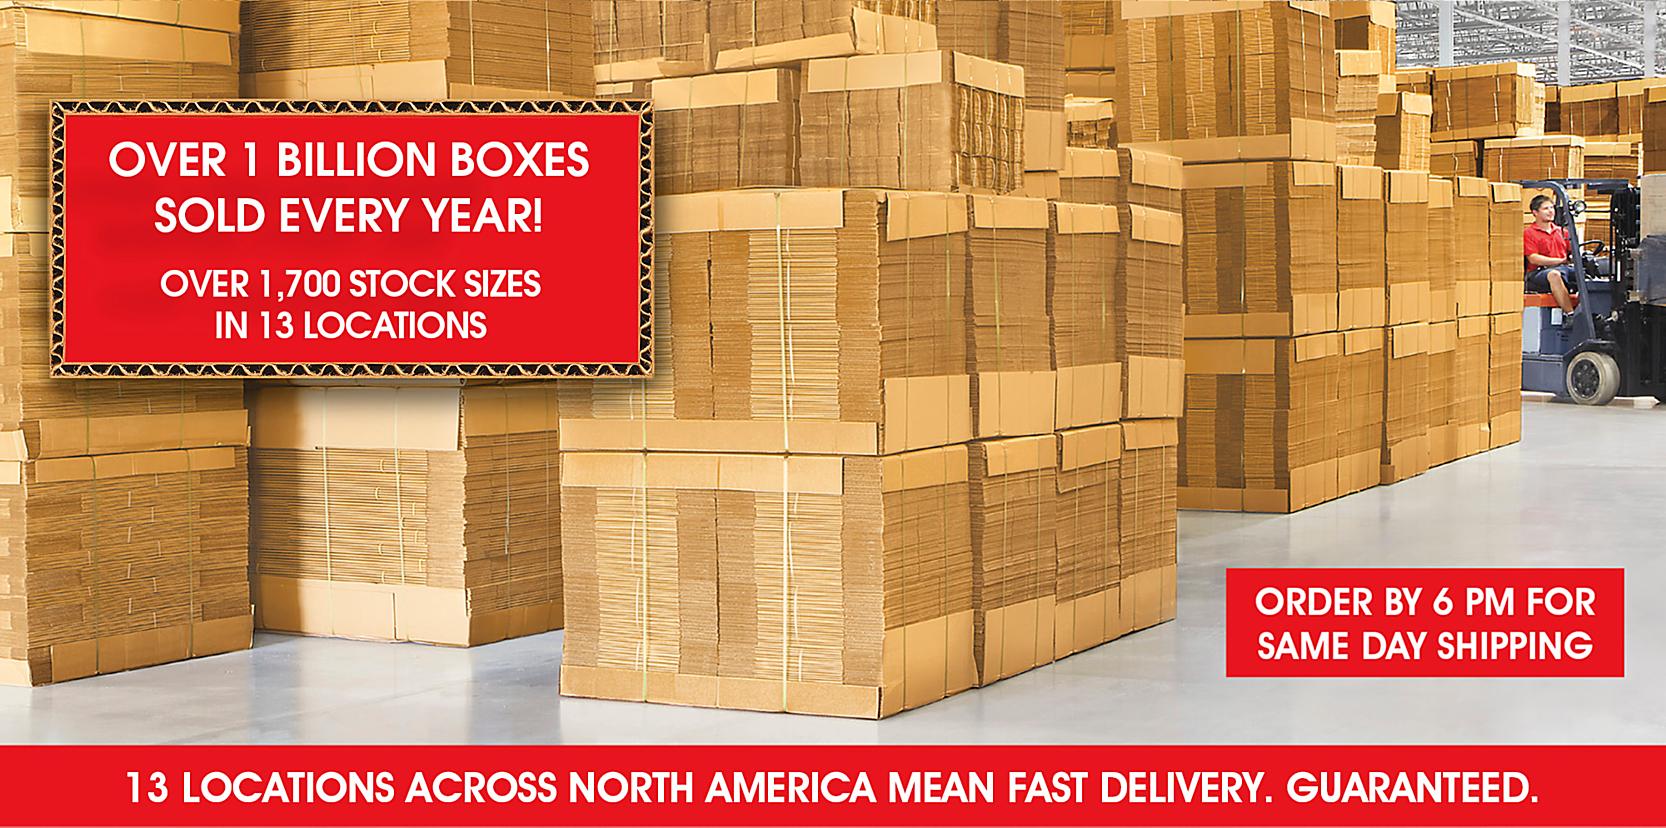 OVER 1 BILLION BOXES SOLD EVERY YEAR - OVER 1,700 STOCK SIZES - 12 LOCATIONS ACROSS NORTH AMERICA MEAN FAST DELIVERY. GUARANTEED.